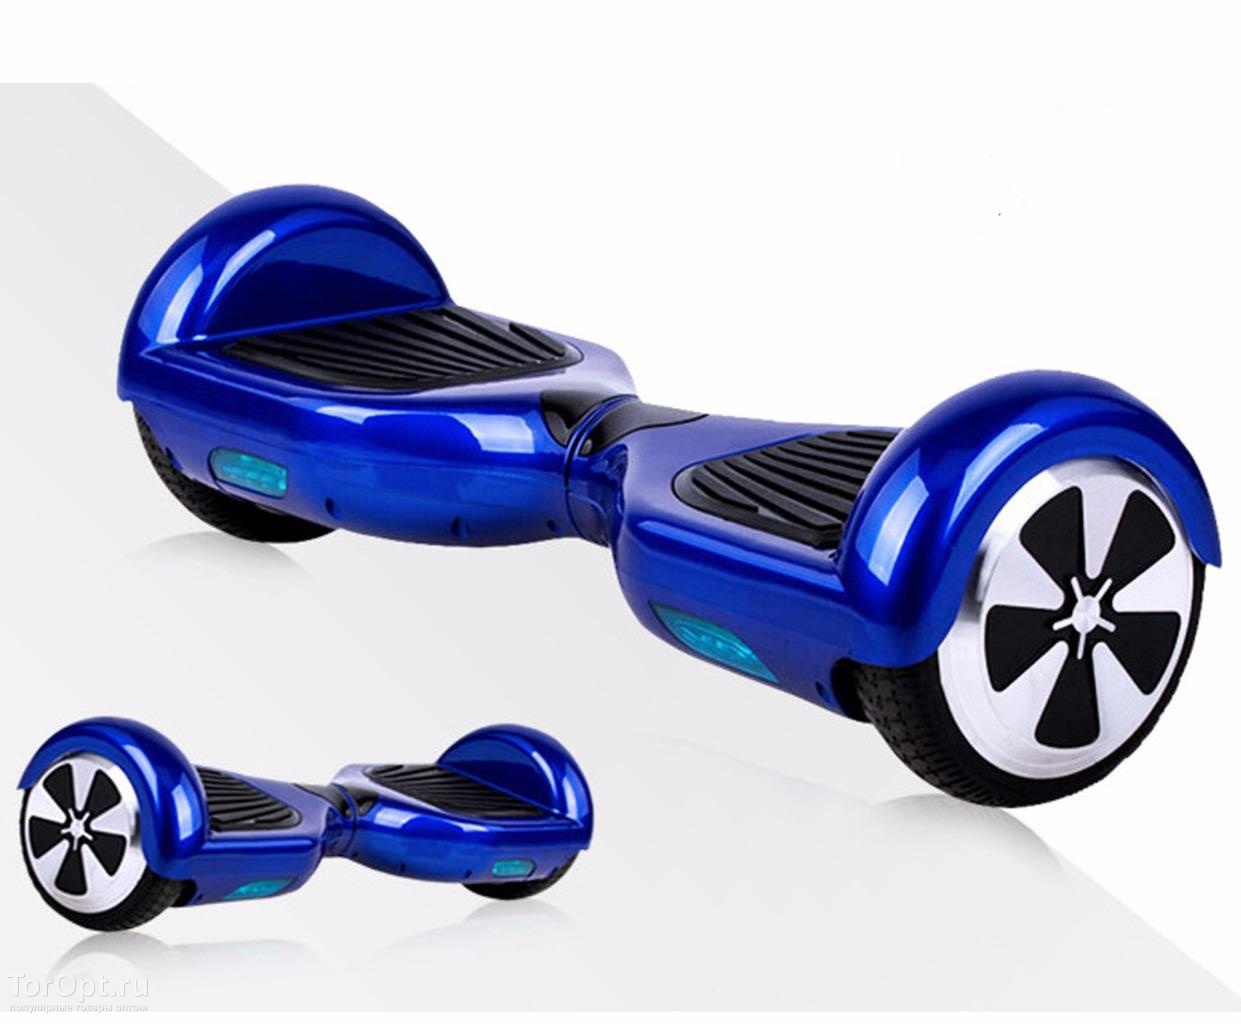 Q3 Bluetooth Hoverboard